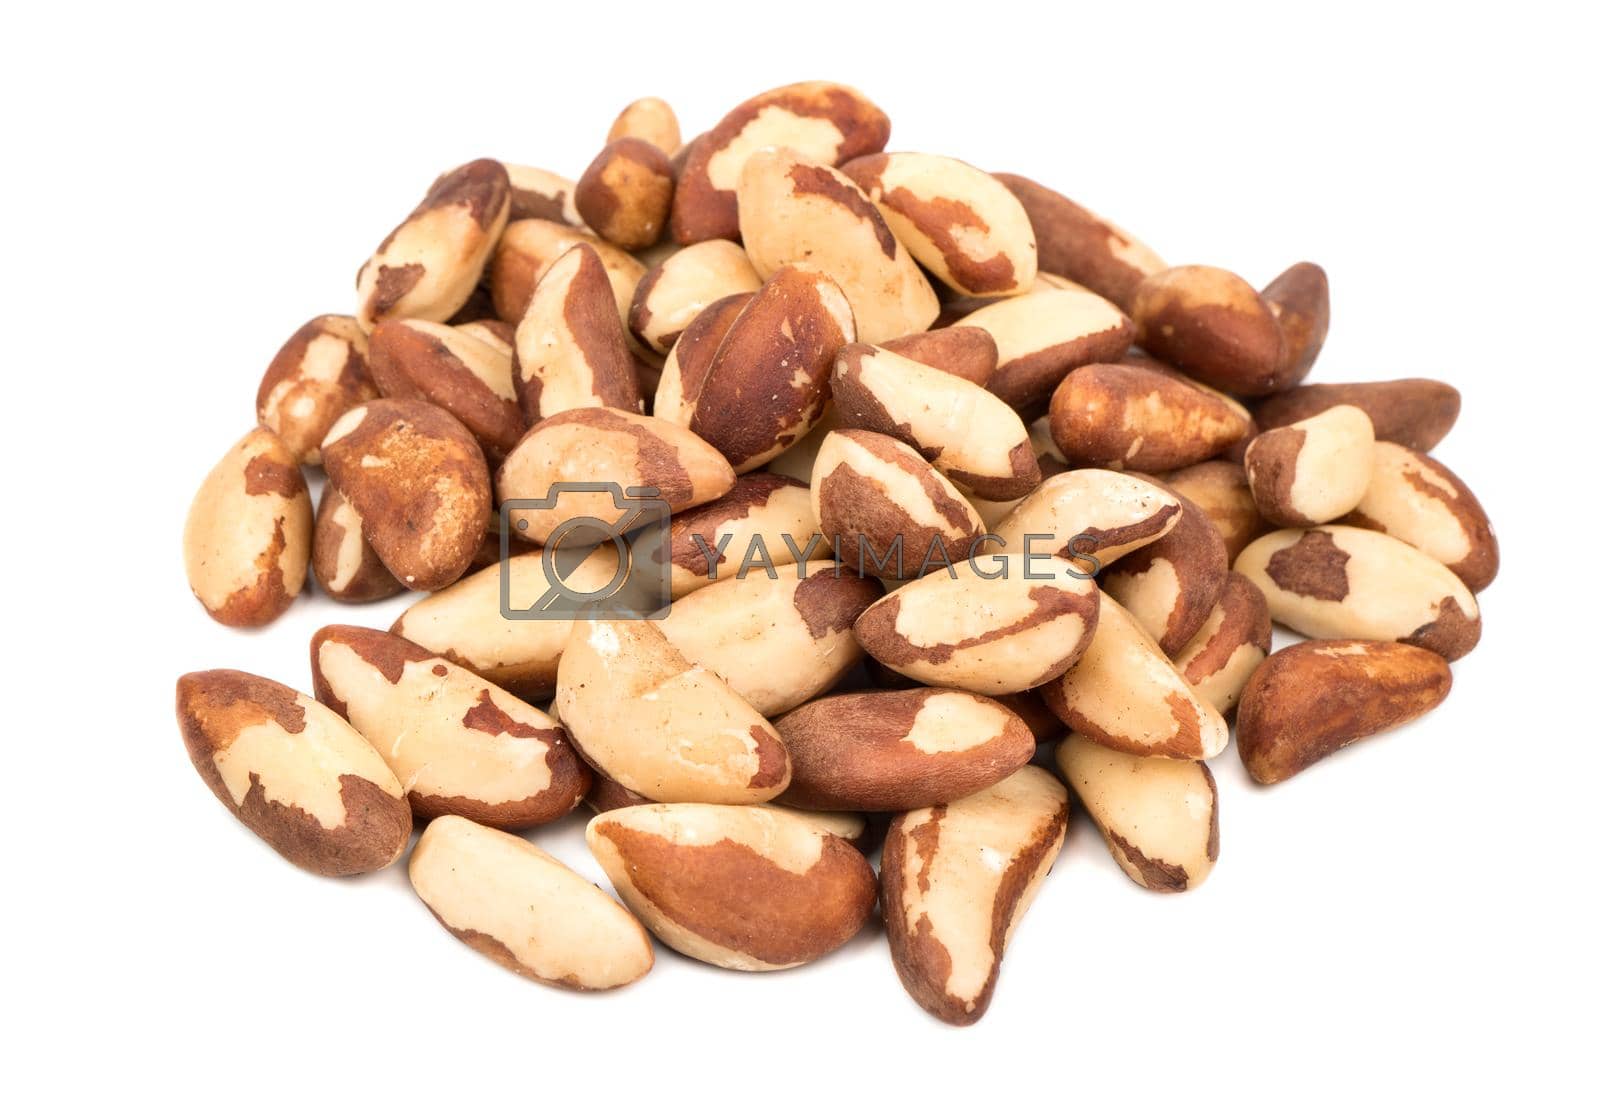 Royalty free image of Pile of Brazil nuts by andregric